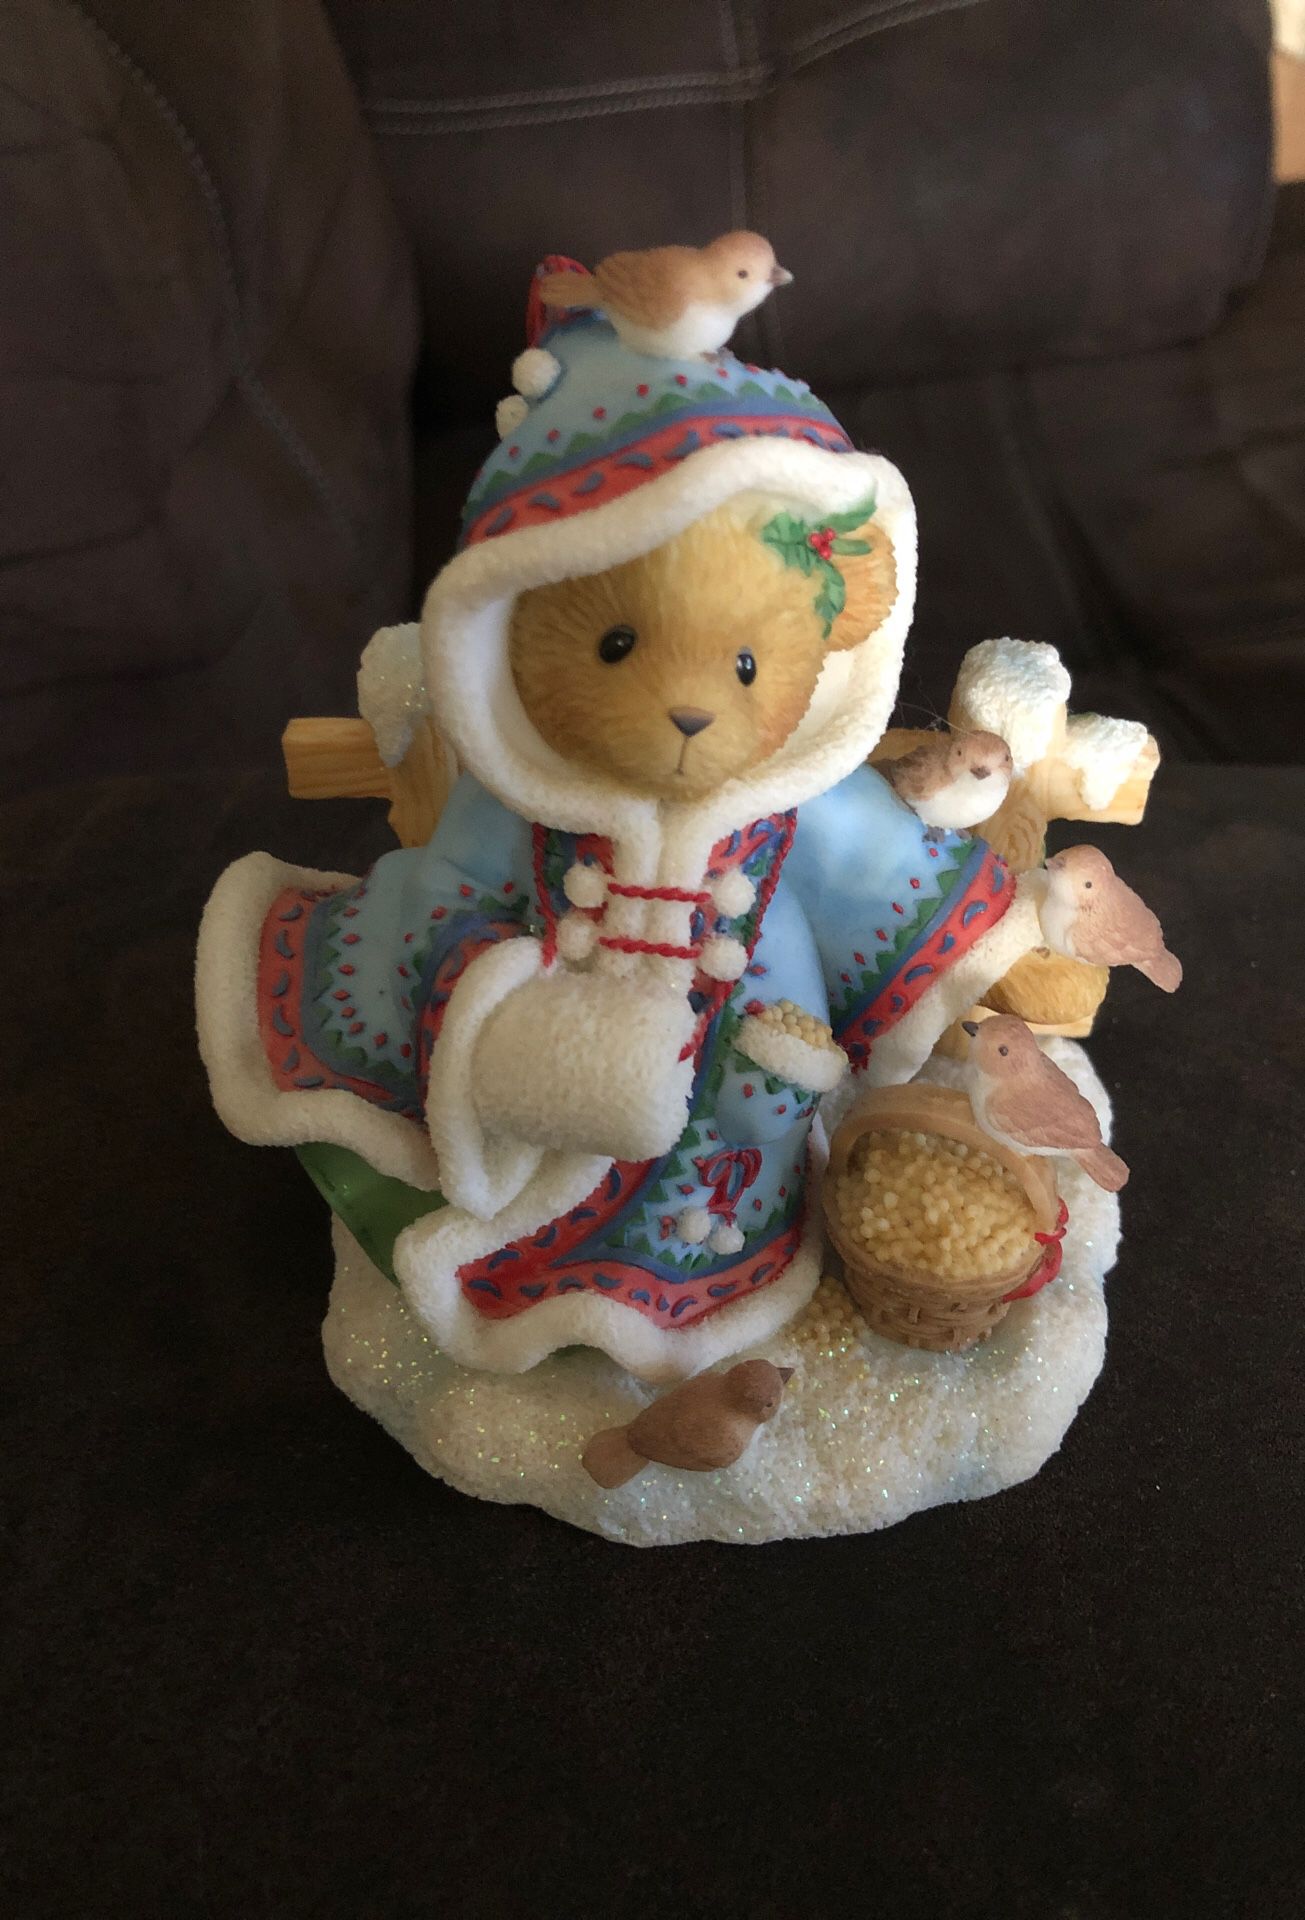 Cherished Teddies “Your smile can melt any heart”